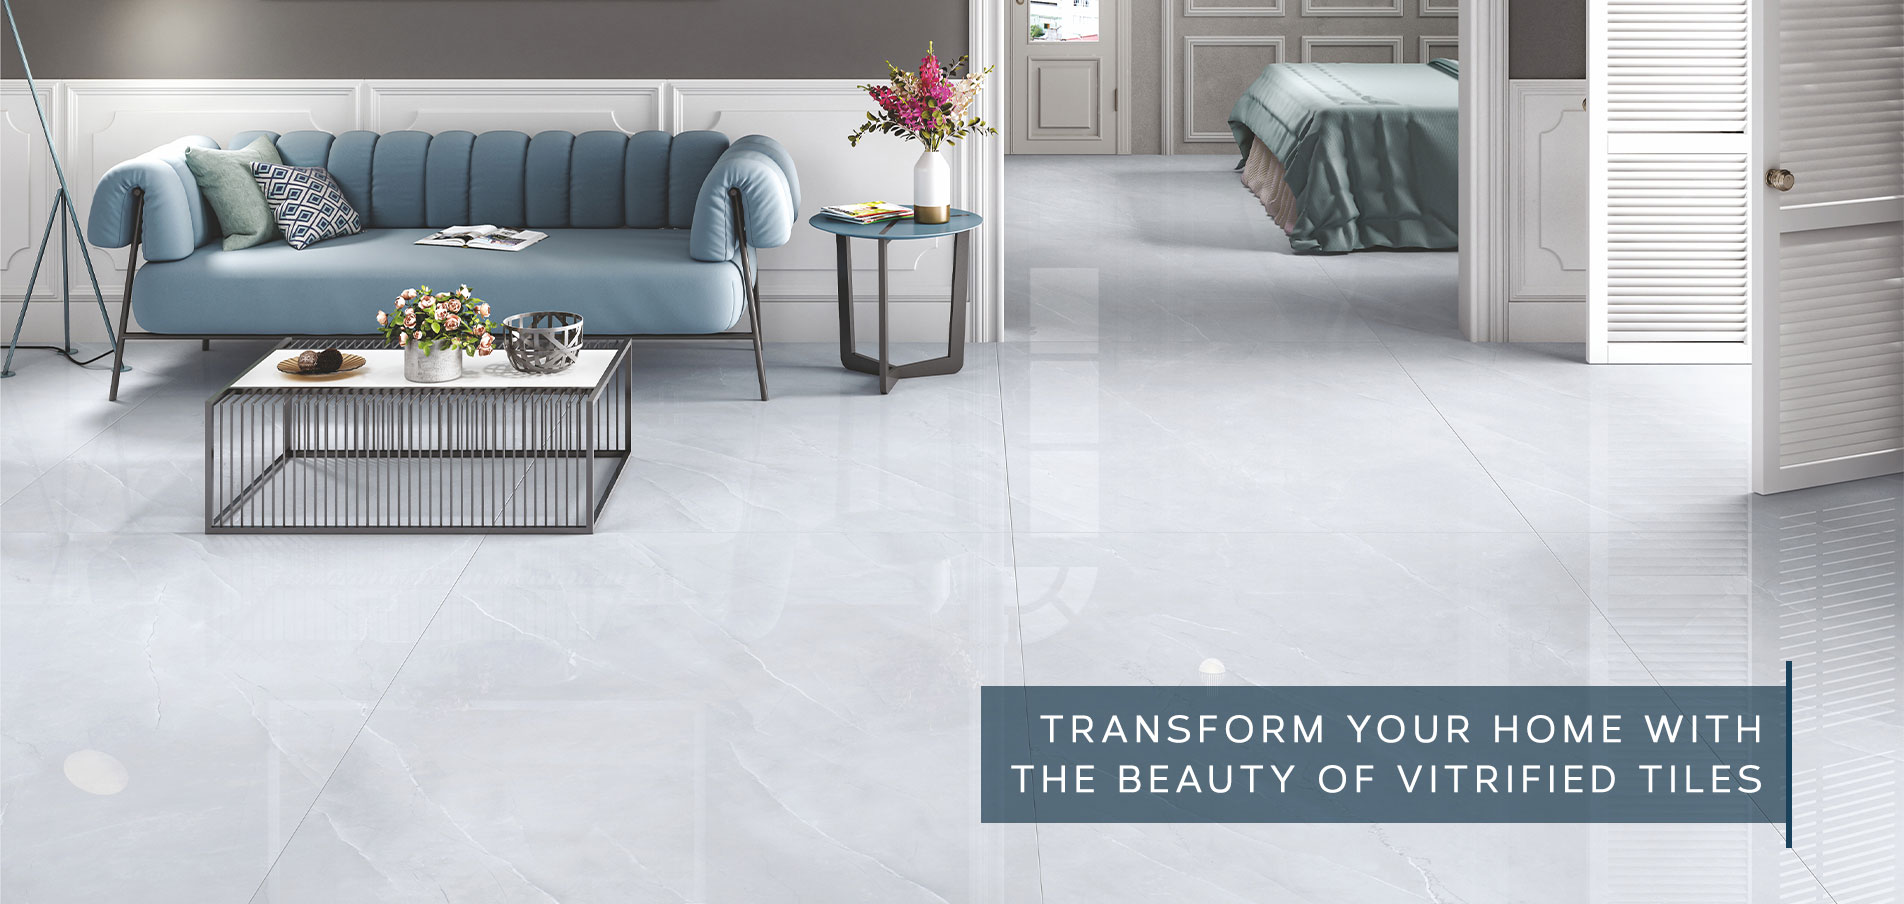 Transform your home with the beauty of vitrified tiles